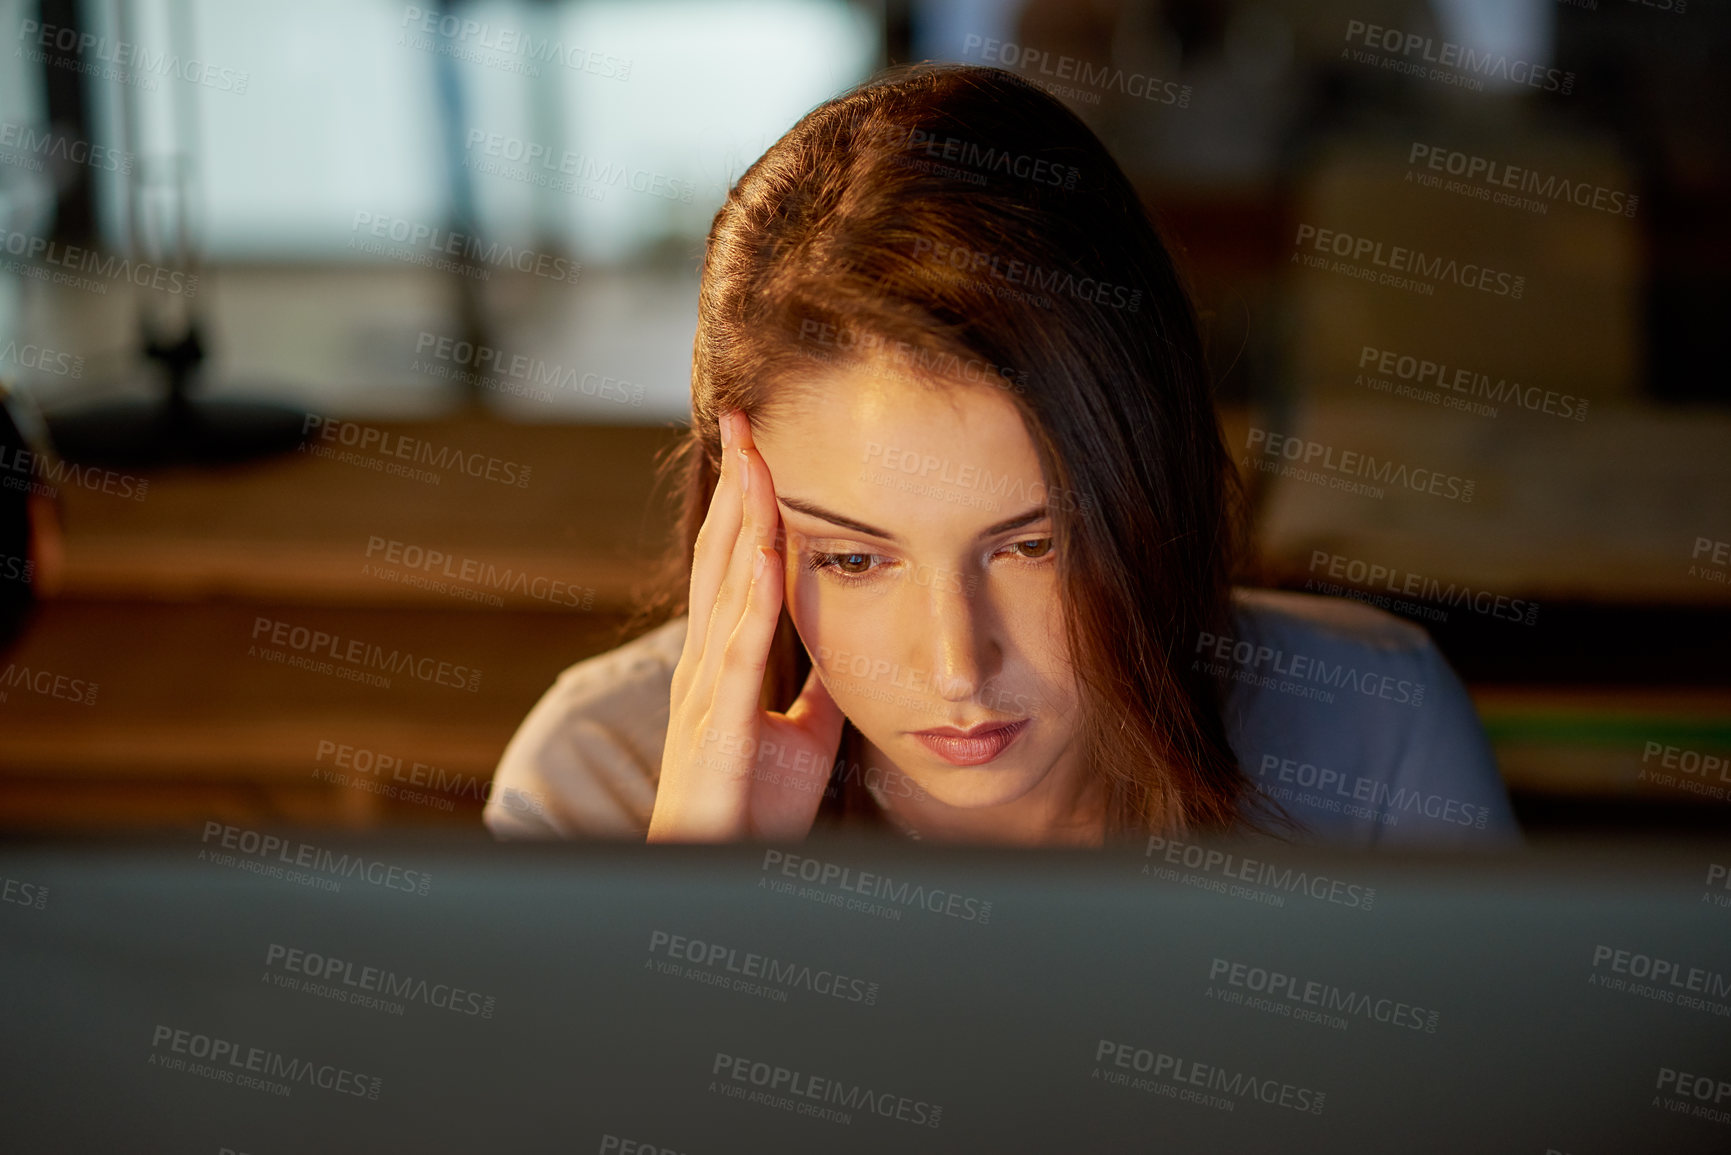 Buy stock photo Shot of an attractive young businesswoman looking stressed while working late in the office